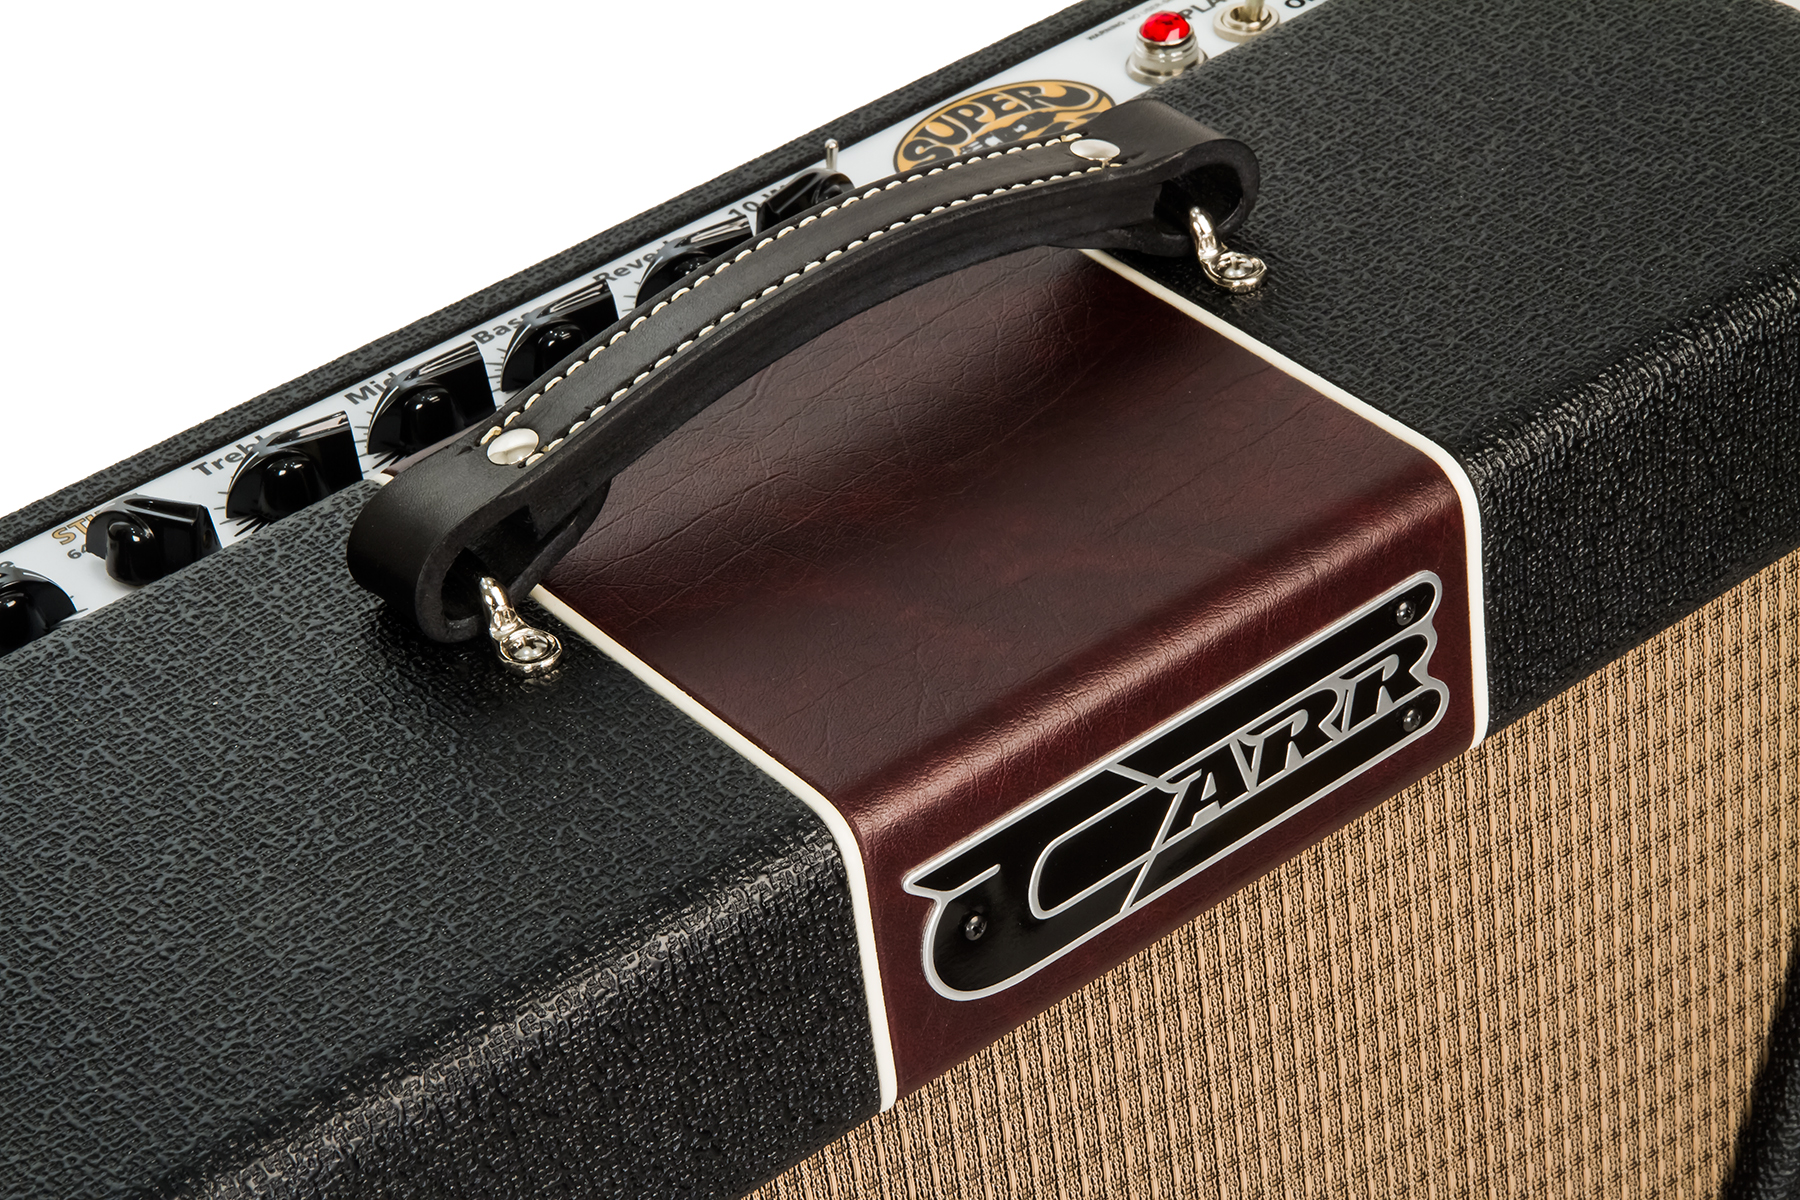 Carr Amplifiers Super Bee 1-12 Combo 10w 1x12 Black/wine - Electric guitar combo amp - Variation 3